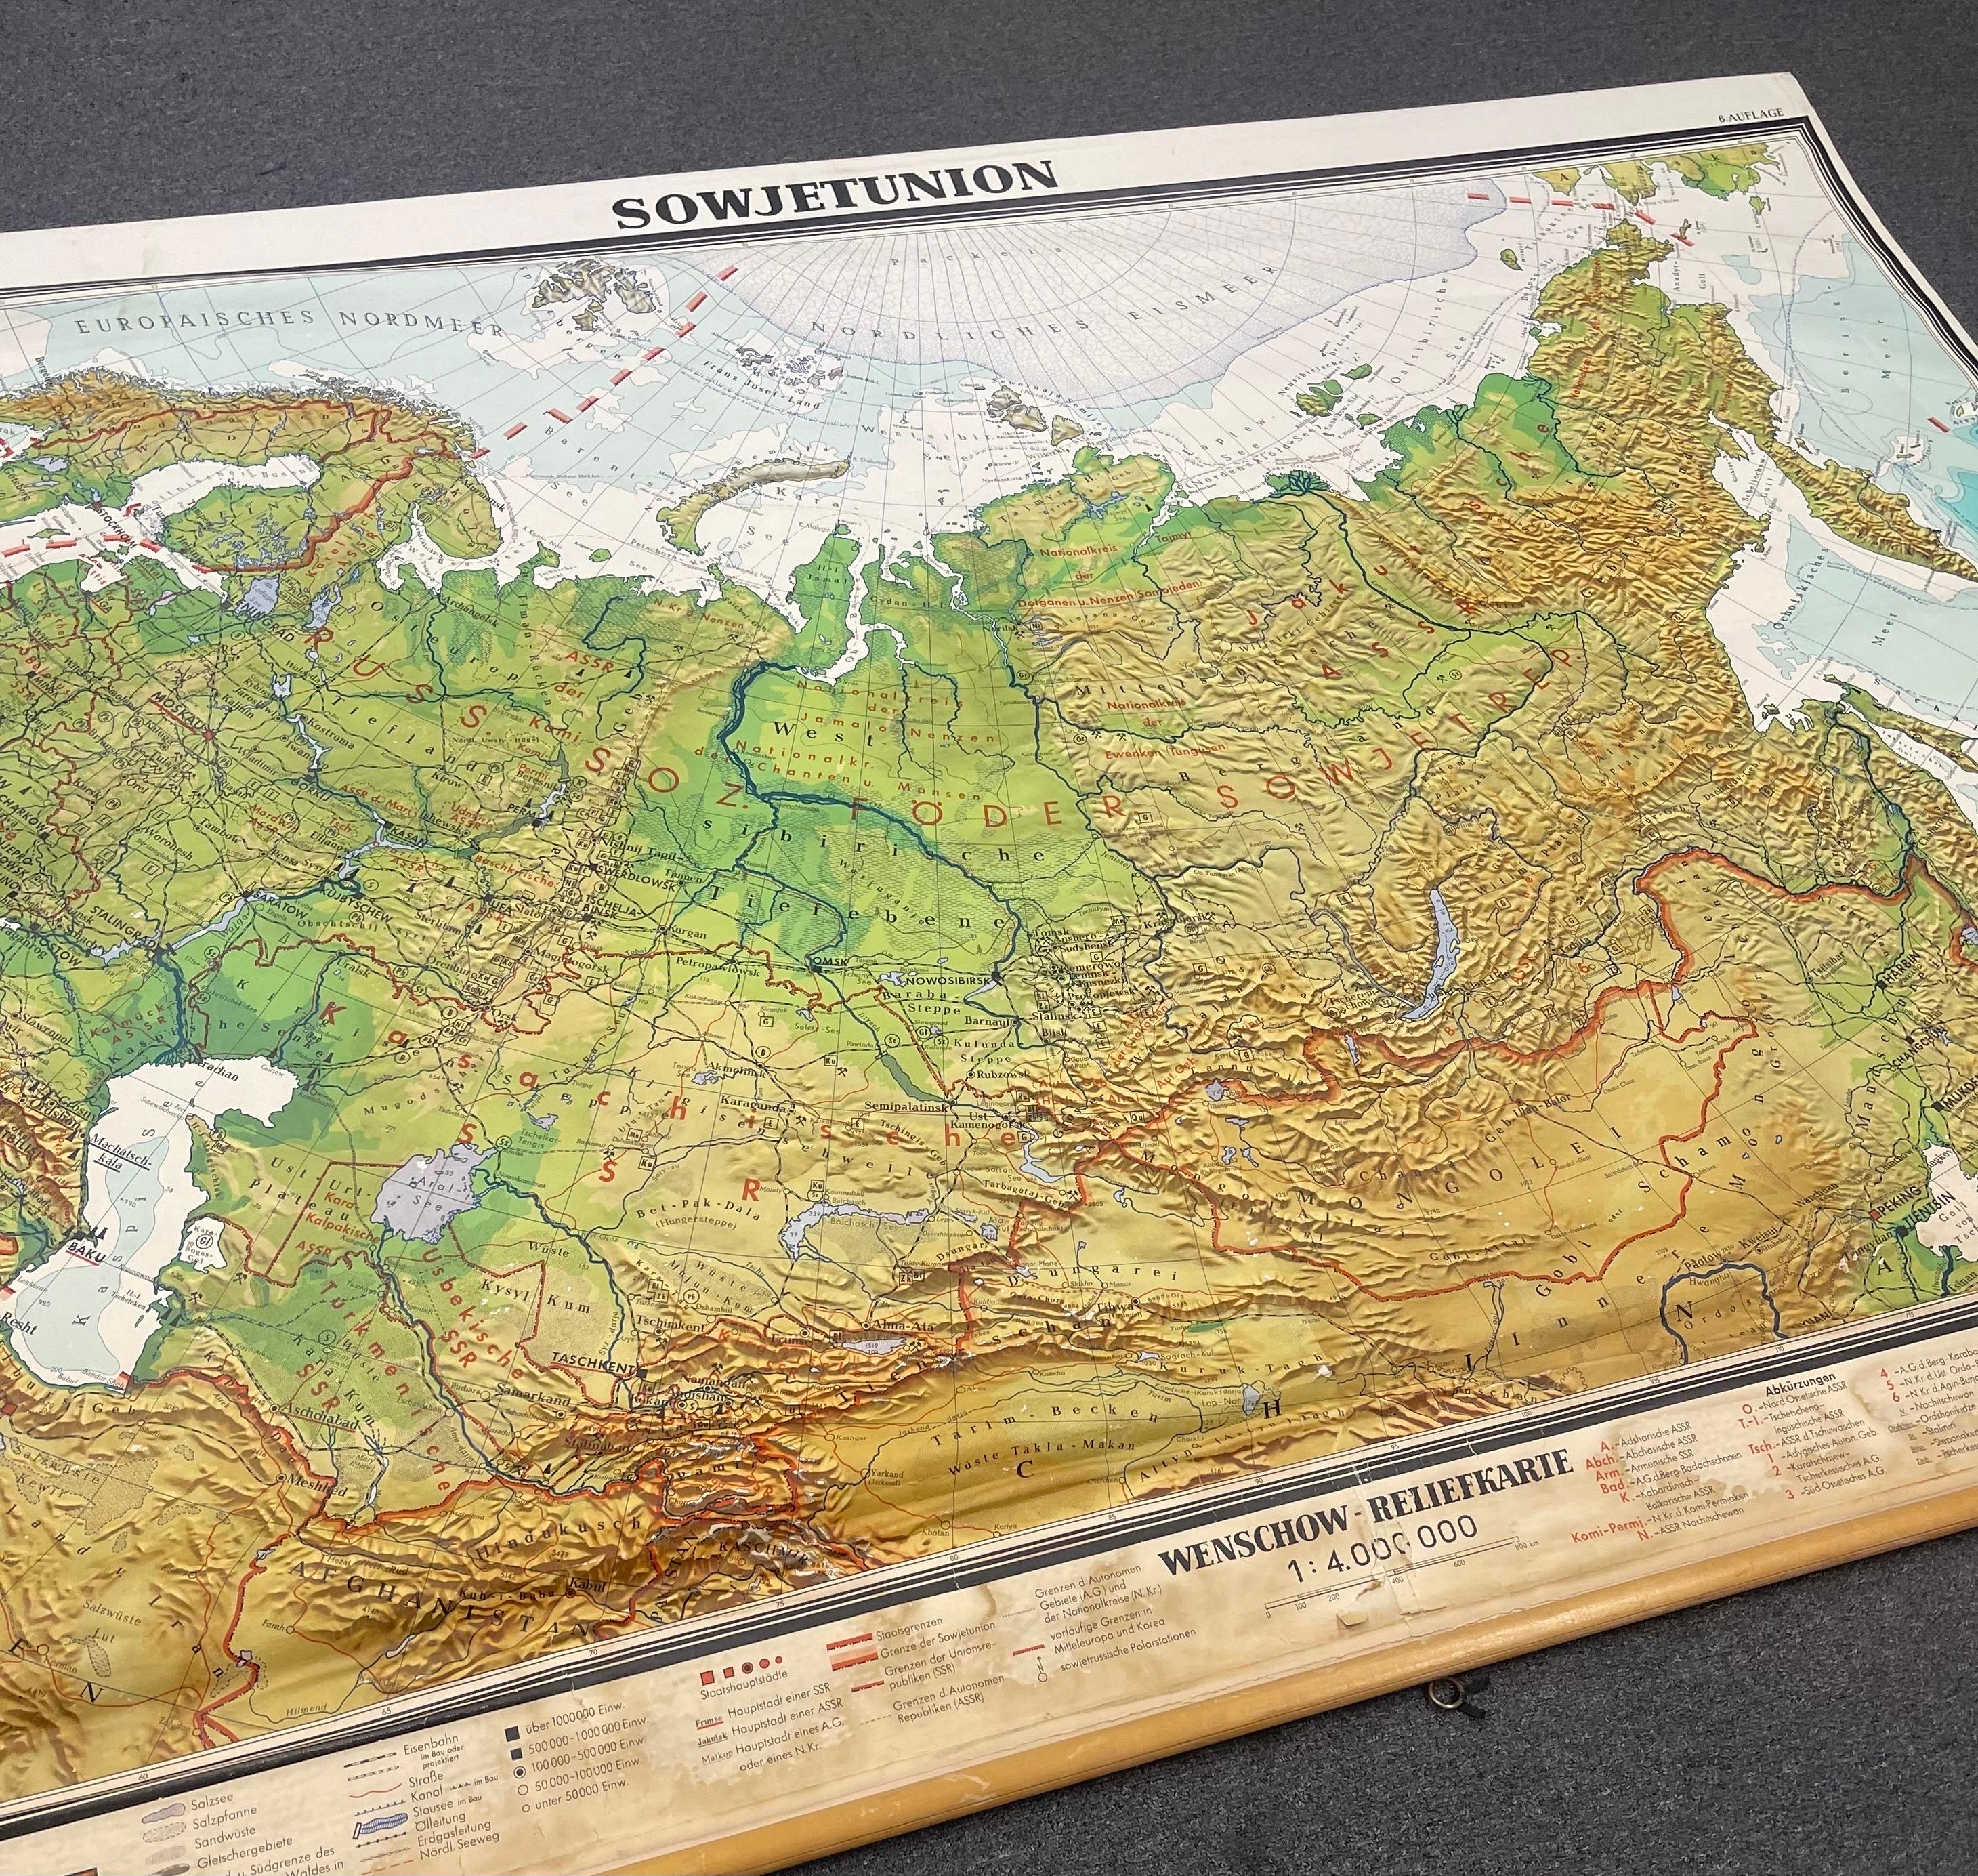 Massive Vintage Wall Map of the Soviet Union 'Sowjetunion' by Karl Wenschow For Sale 4